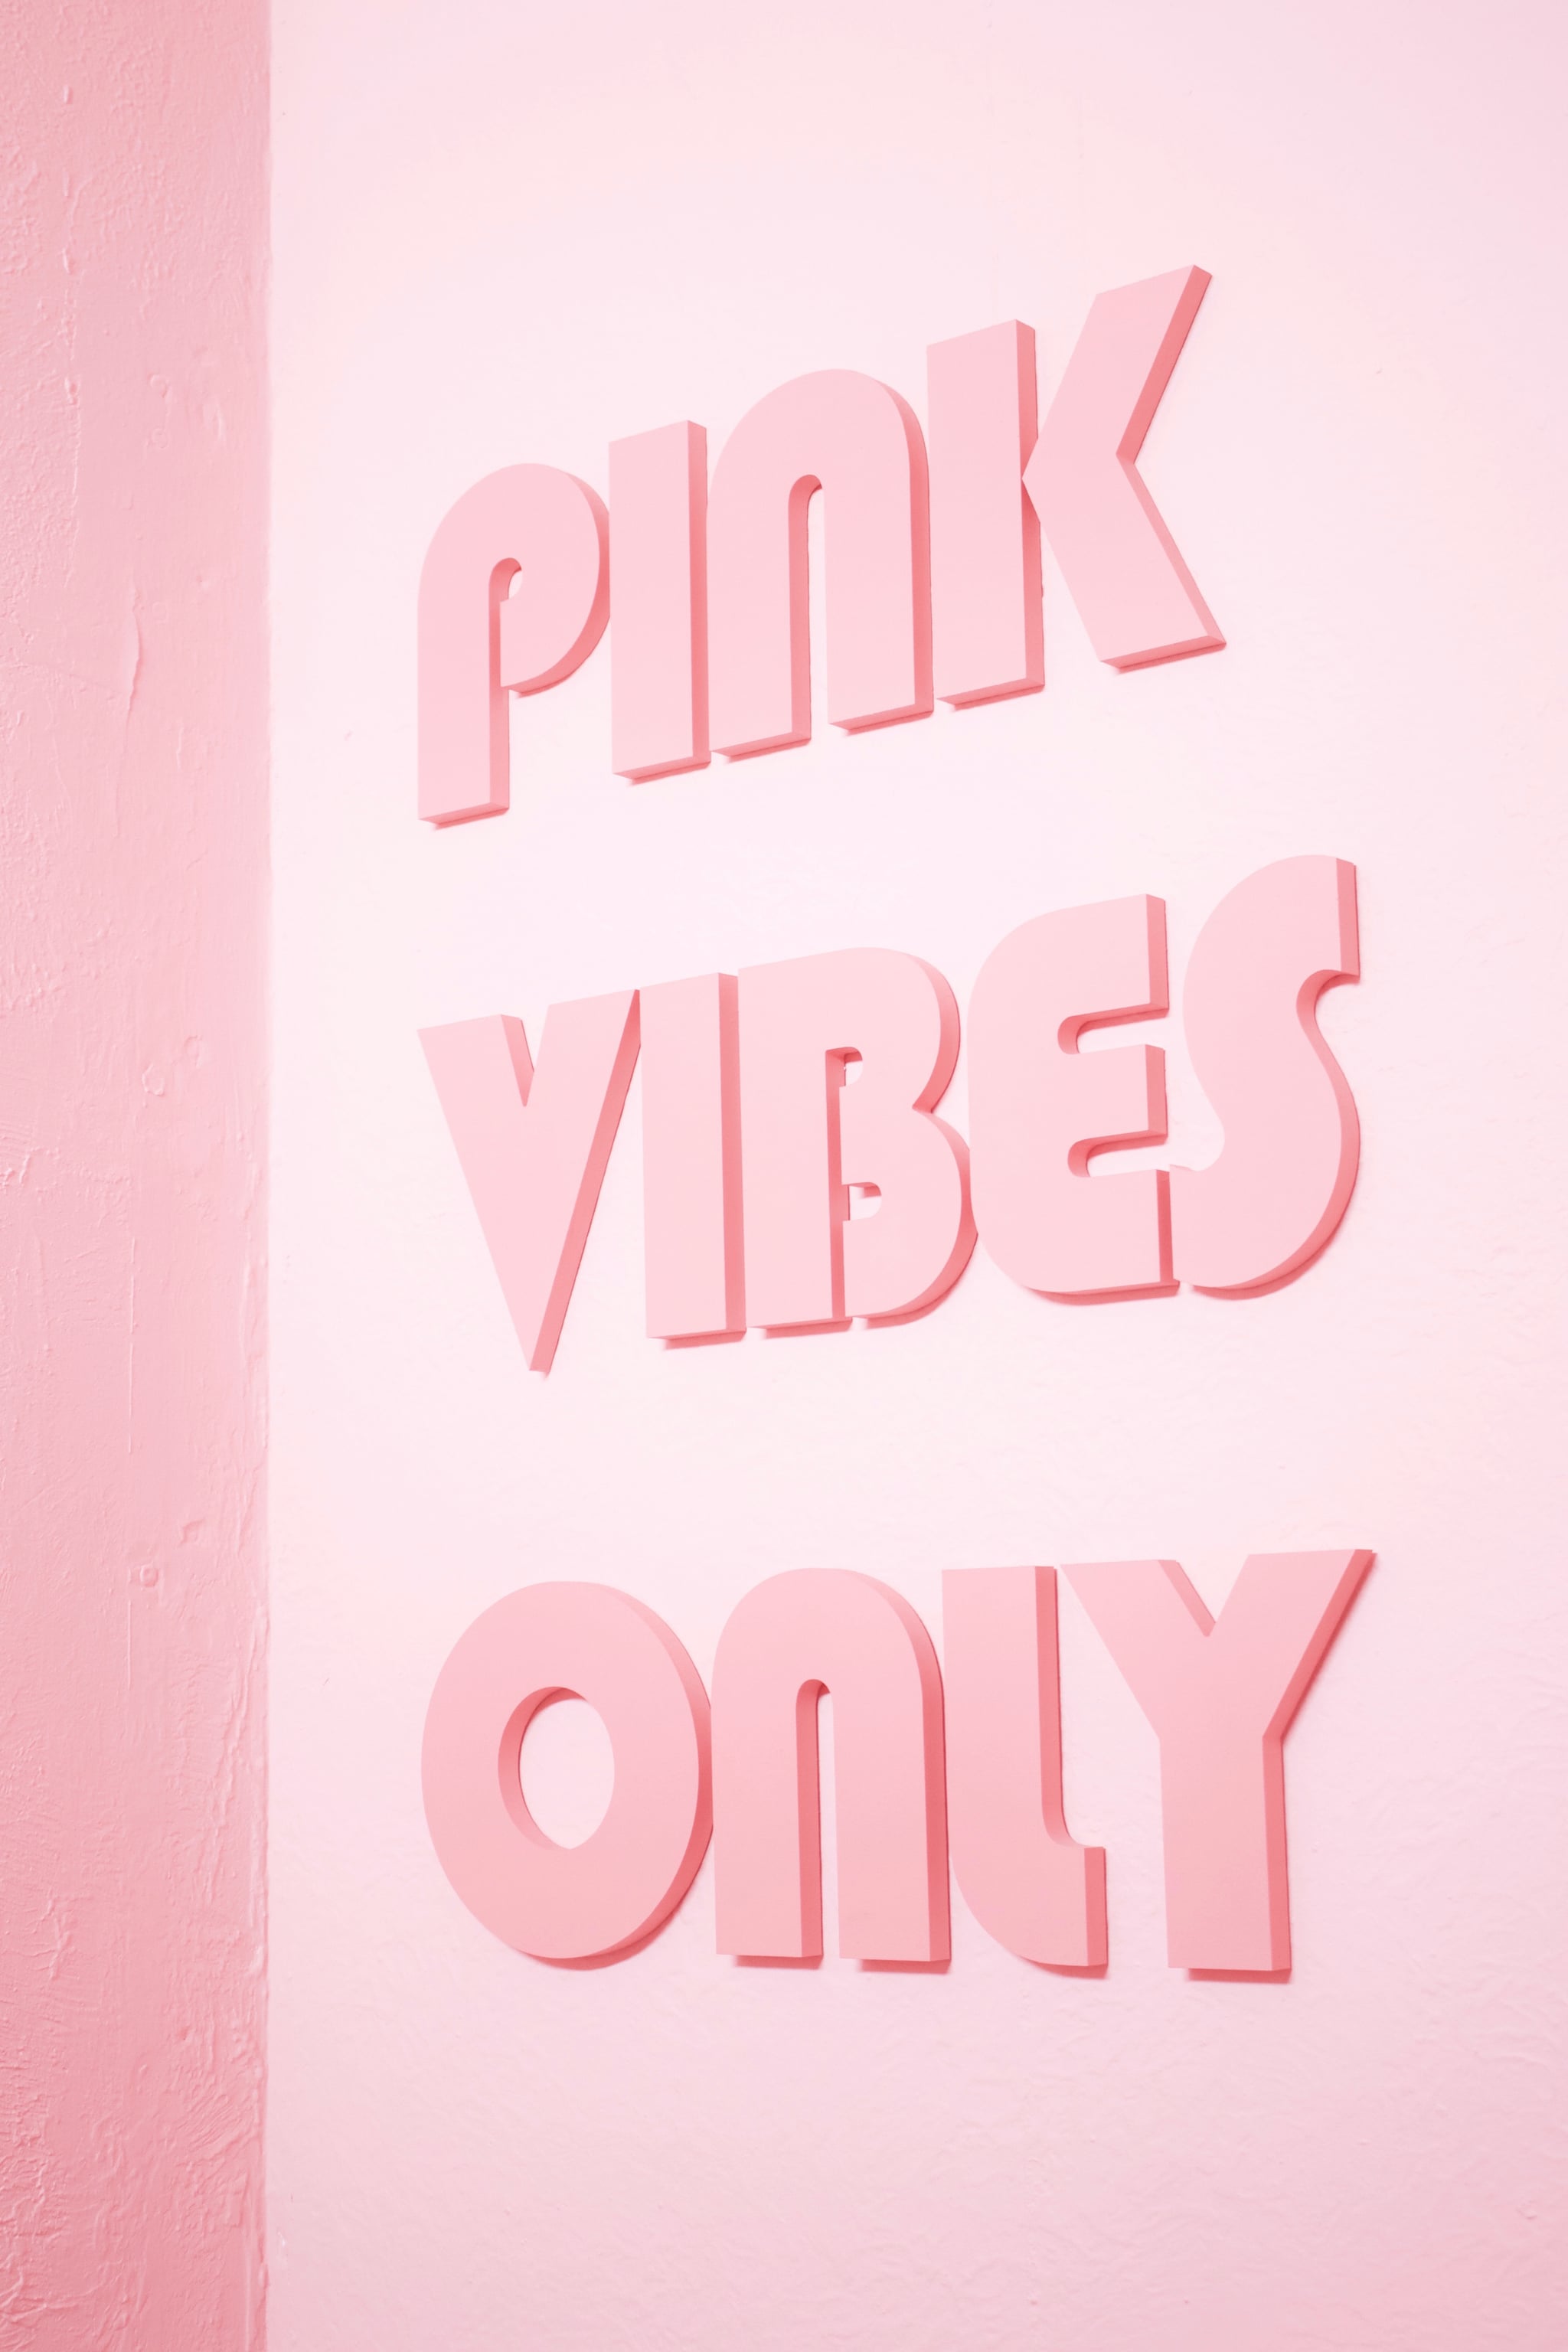 Valentines Day Wallpaper Pink Vibes Only  The Dreamiest iPhone  Wallpapers For Valentines Day That Fit Any Aesthetic  POPSUGAR Tech Photo  38